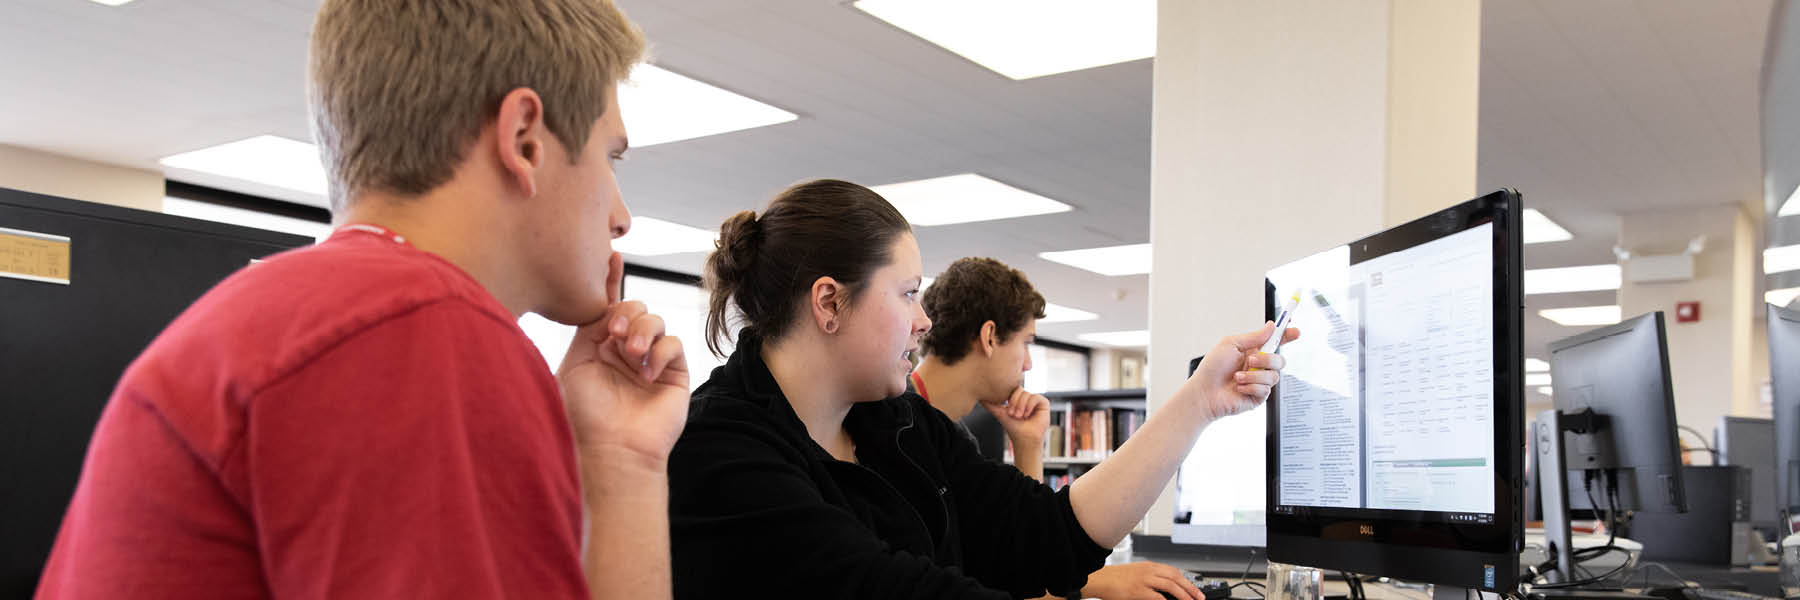 An advisor points out something on a computer screen to a student.